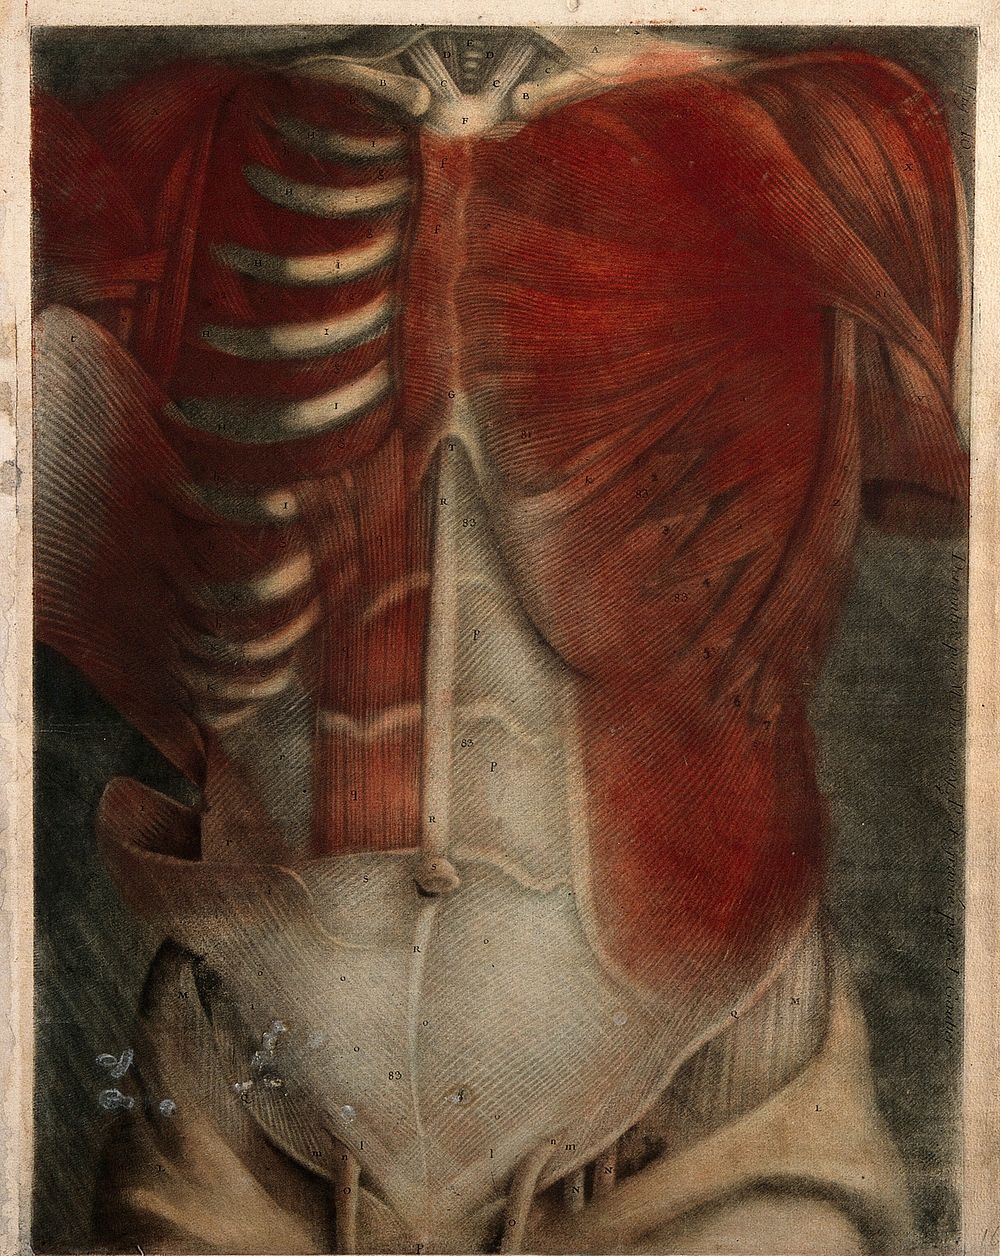 Muscles of the thorax and abdomen: écorchés figure. Colour mezzotint by J. F. Gautier d'Agoty after himself, 1745/1746.